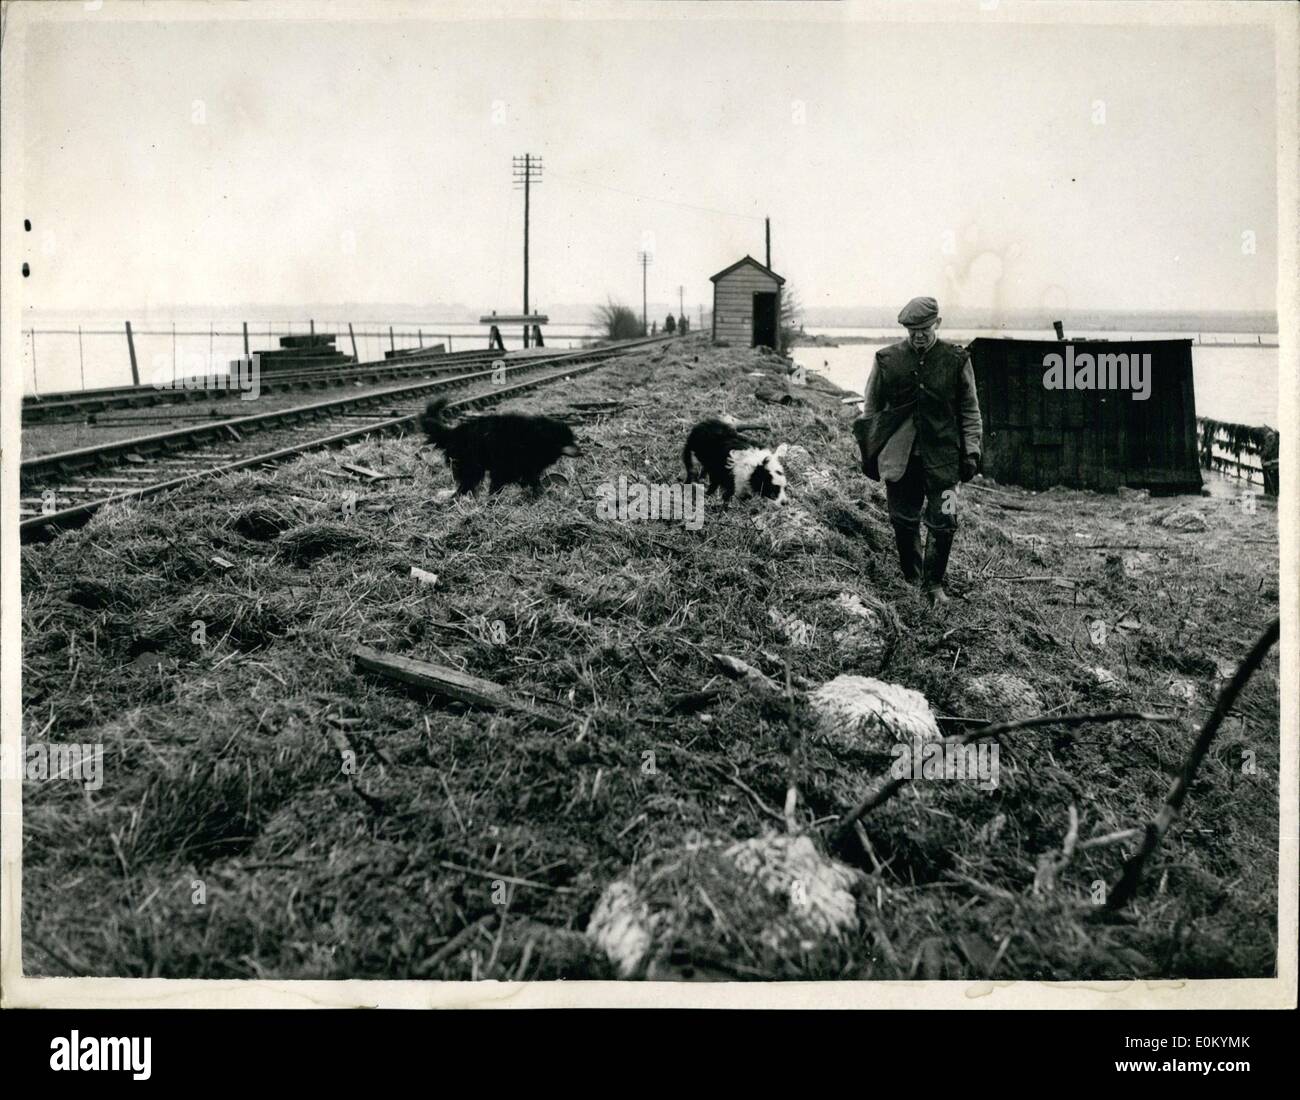 Feb. 02, 1953 - 5,000 sheep die on the isle of sheppey. a sound bed of dead sheet and cattle. Army personnel were busily at work today on ''Operation livestock'' - on the Isle of Sheppey rescuing sheep - bullocks etc. trapped in the floods, it is estimated that over 5,000 sheep are already dead. Photo shows Mr. Andrew Barrie- seen with his two sheepdogs ''Mike'' and ''Jerry'' as they search for his sheep. Mr. Barrie had lost 348 sheep - and under the mass of grass and seweed is a bed of sheep and cattle who perished in the floods. Stock Photo